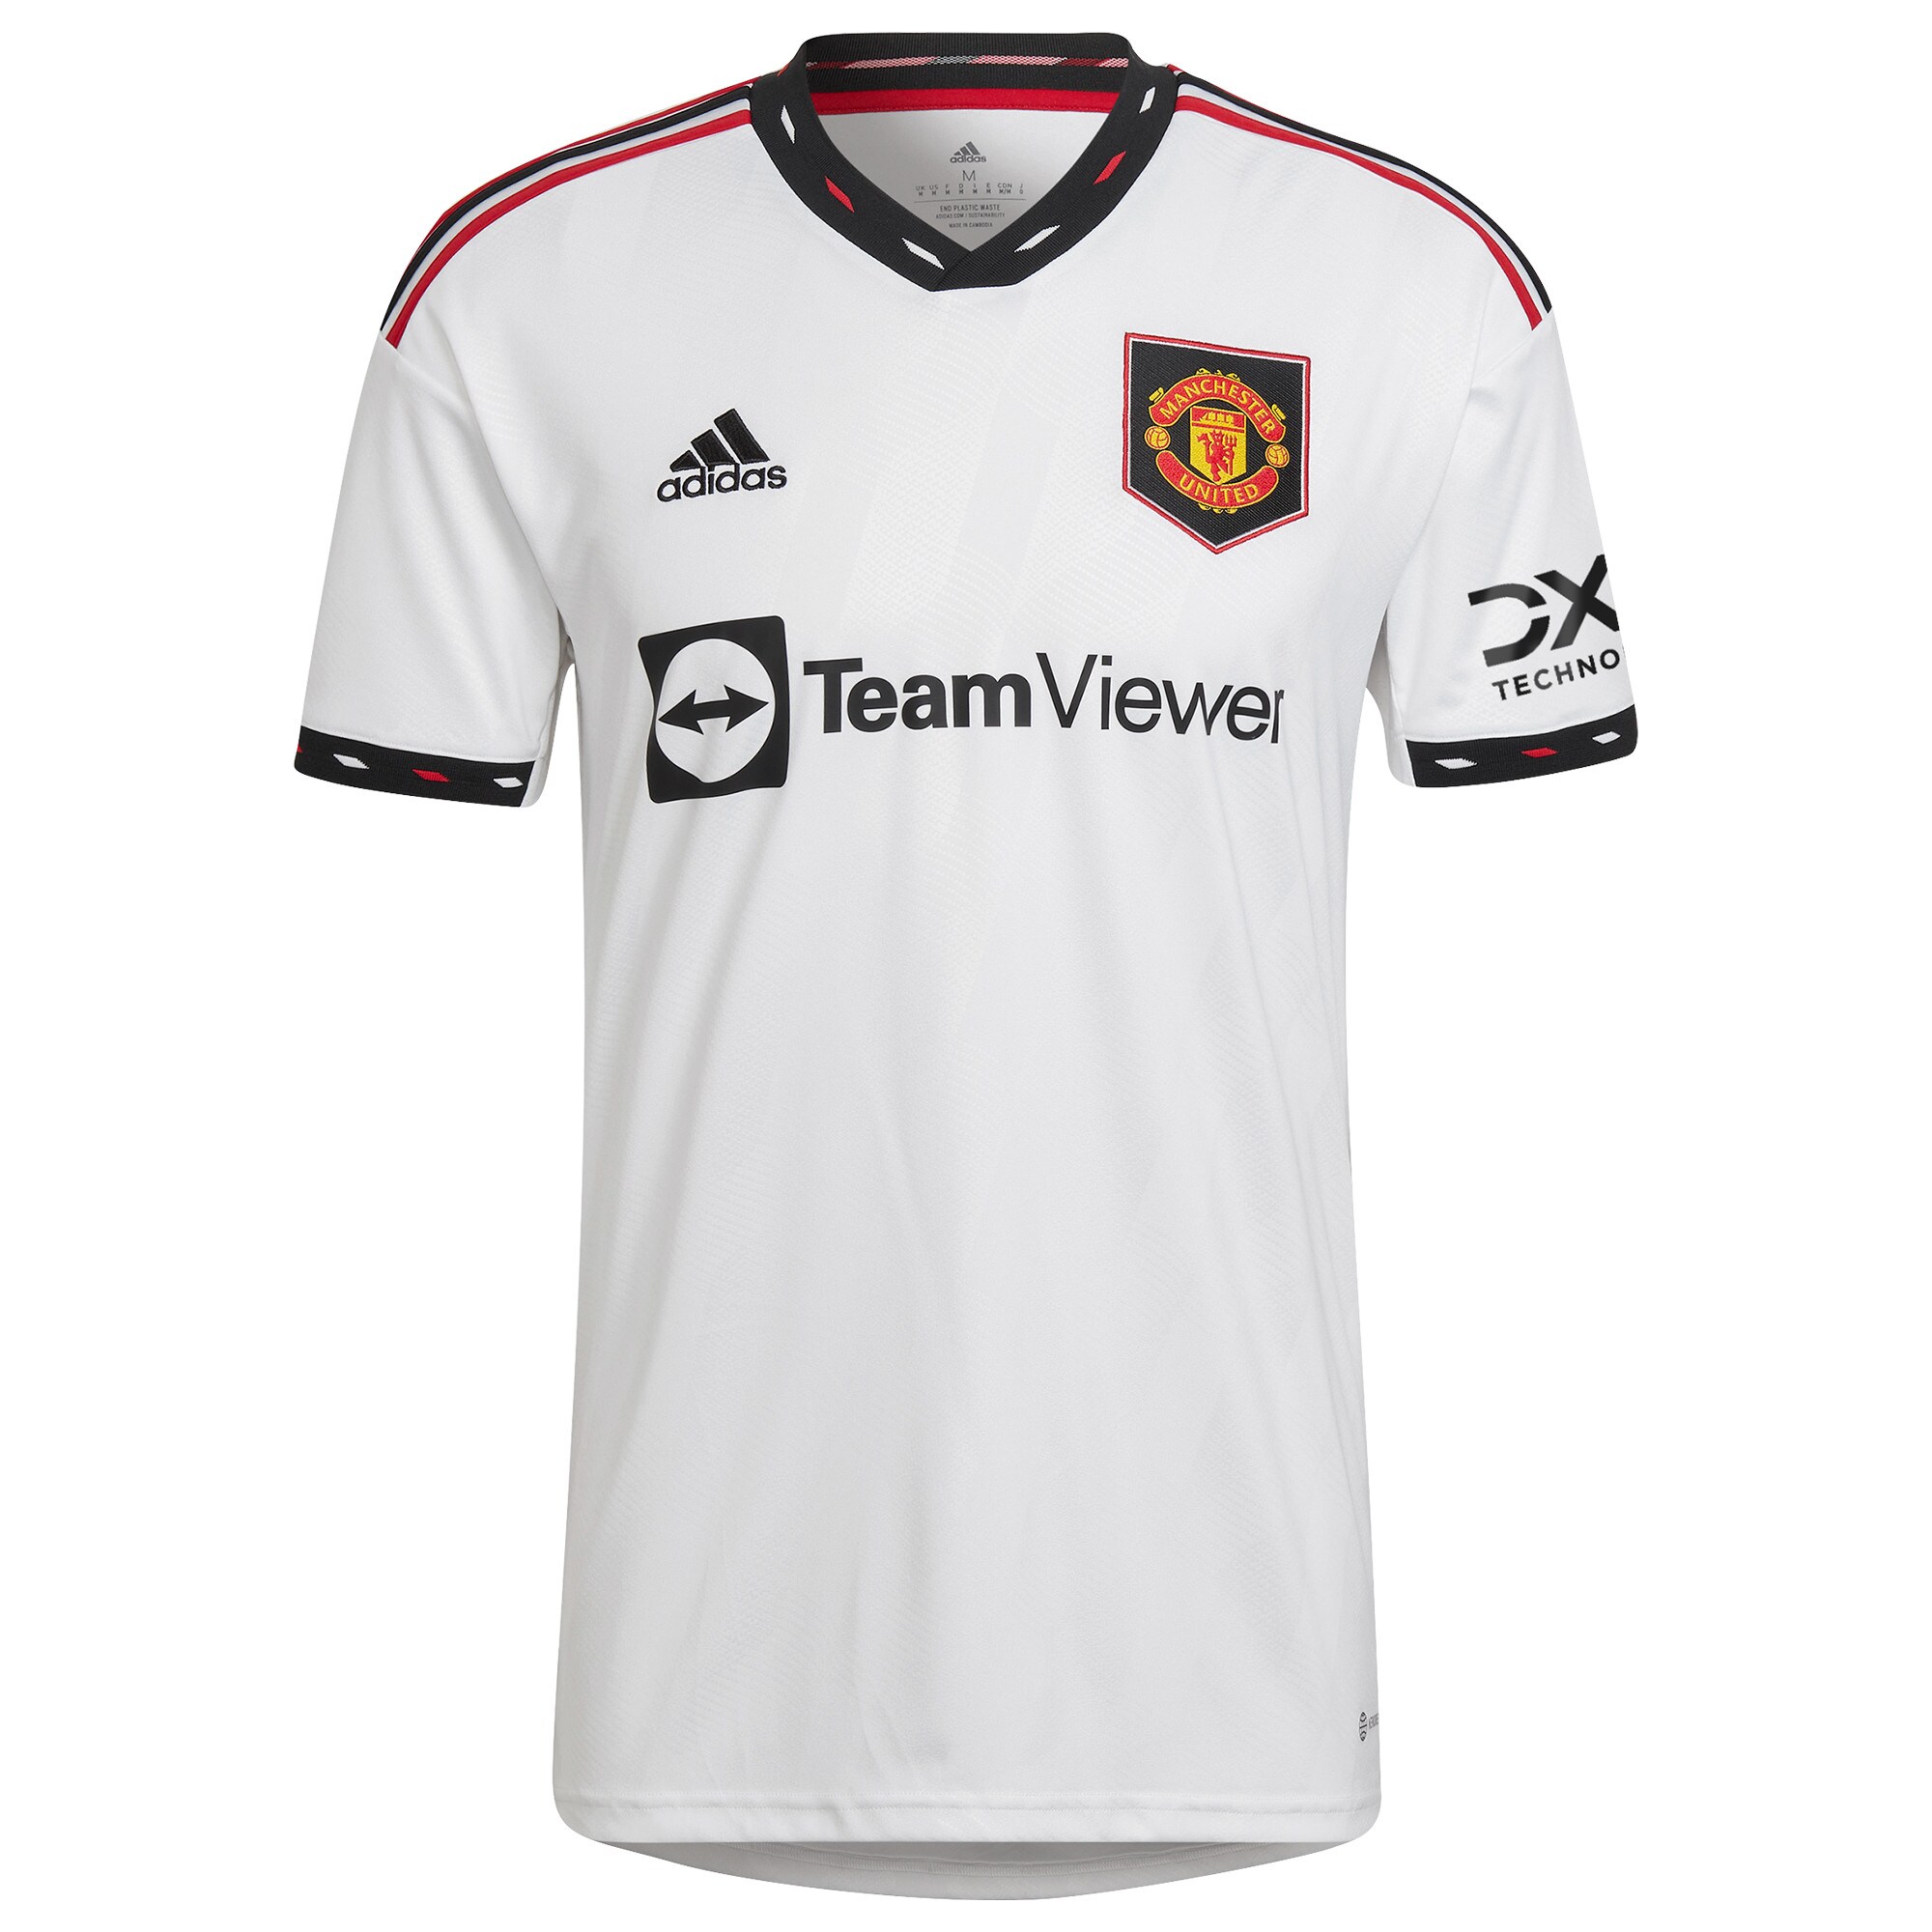 Manchester United Cup Away Shirt 2022-23 with Zelem 10 printing